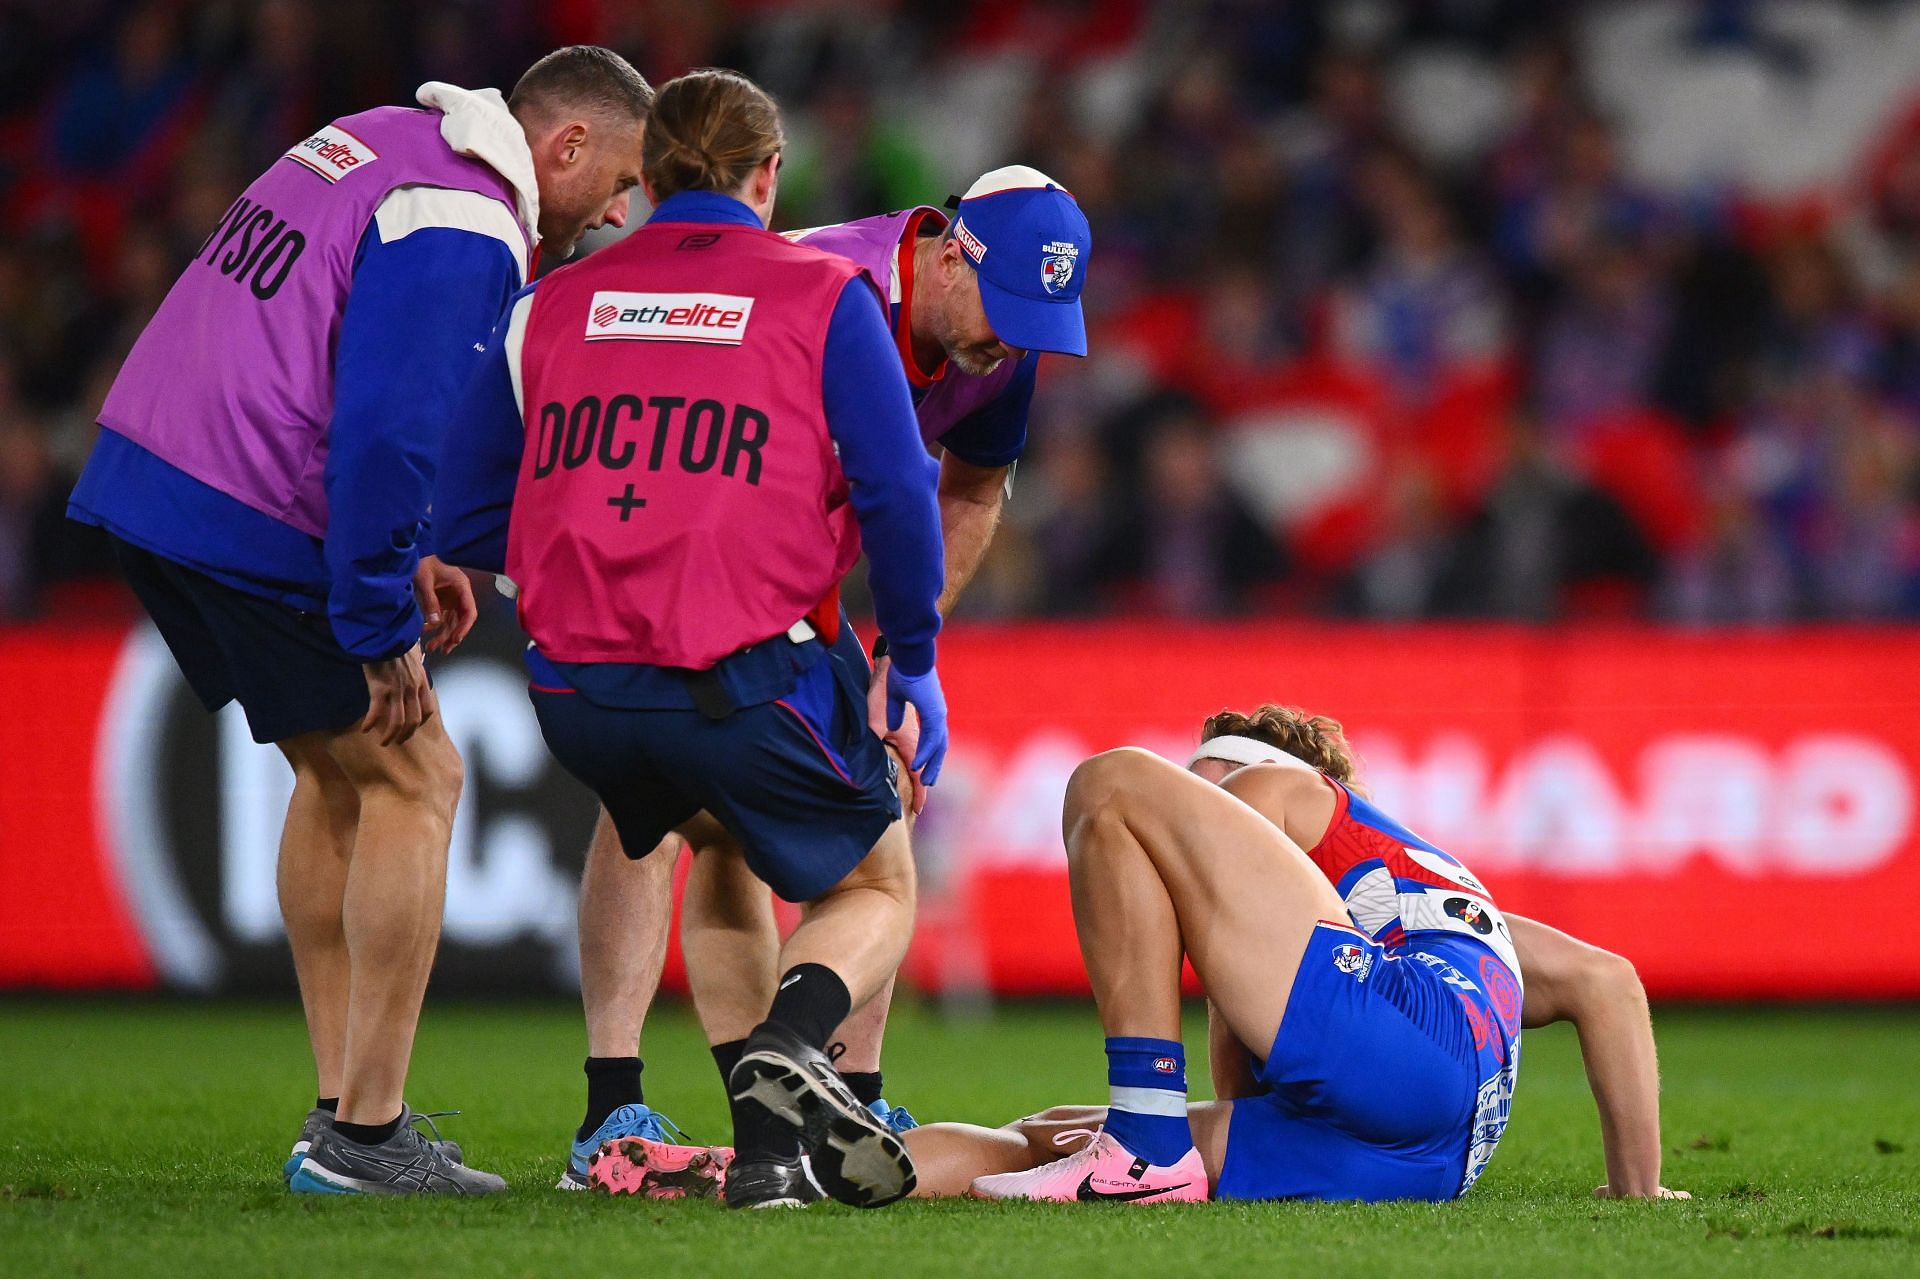 Aaron Naughton of the Bulldogs reacts to an injury during the round 11 AFL match between Western Bulldogs and Sydney Swans